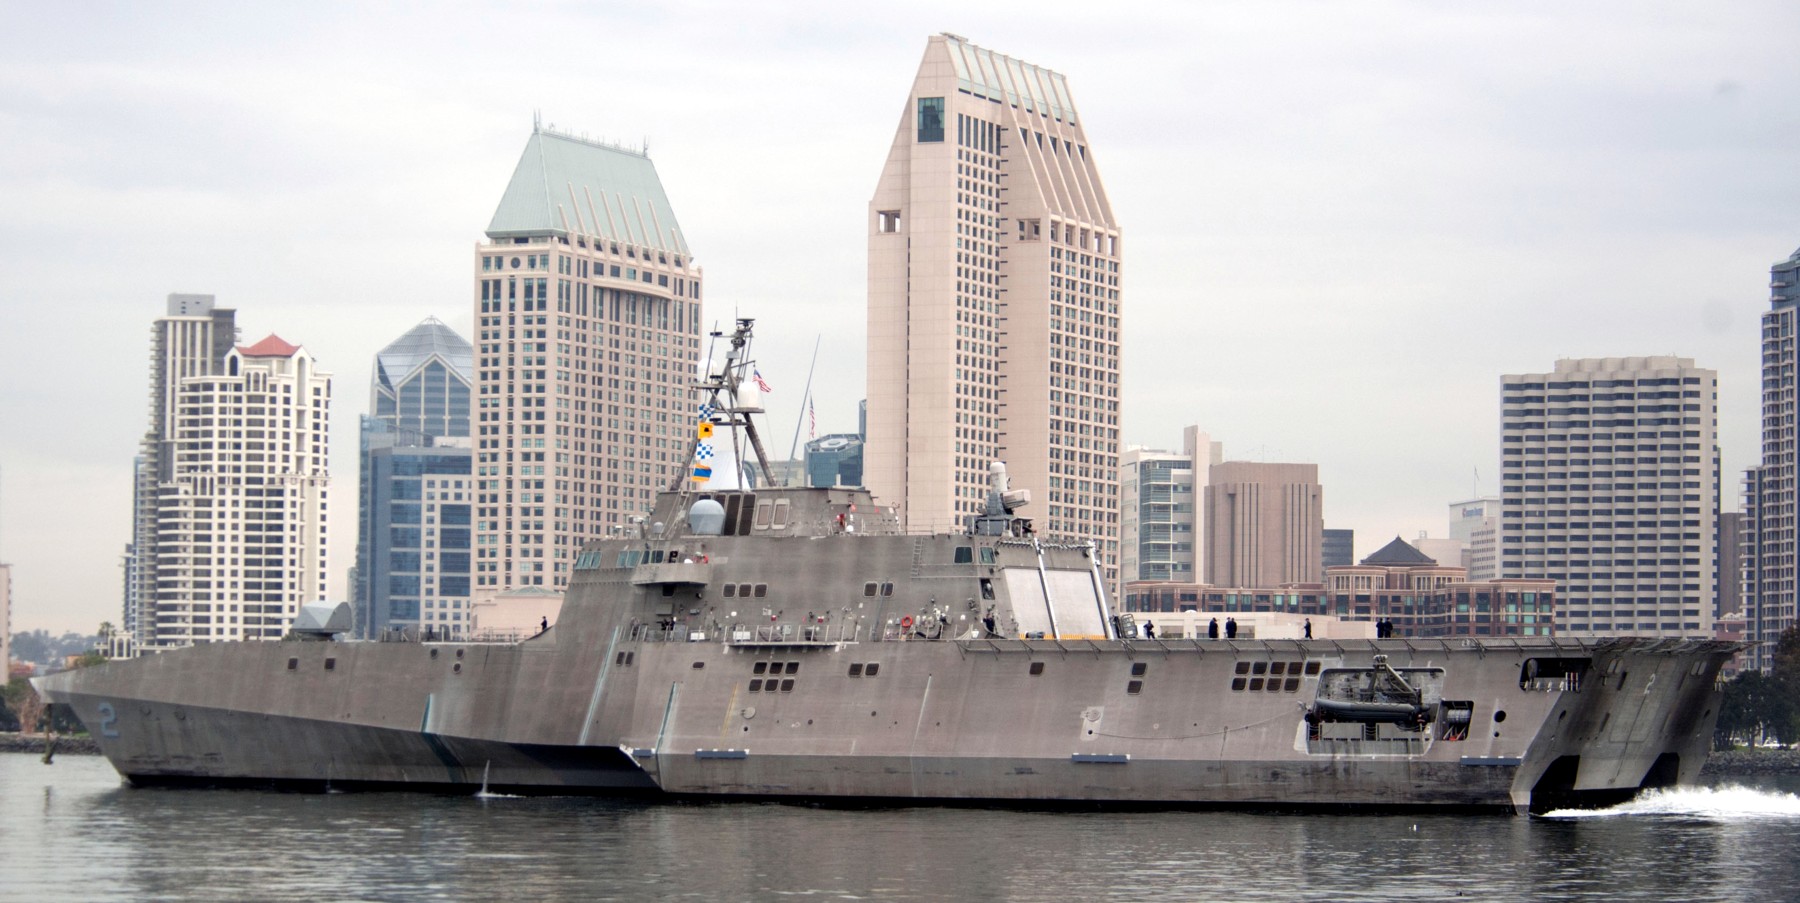 lcs-2 uss independence littoral combat ship us navy class 03a san diego california